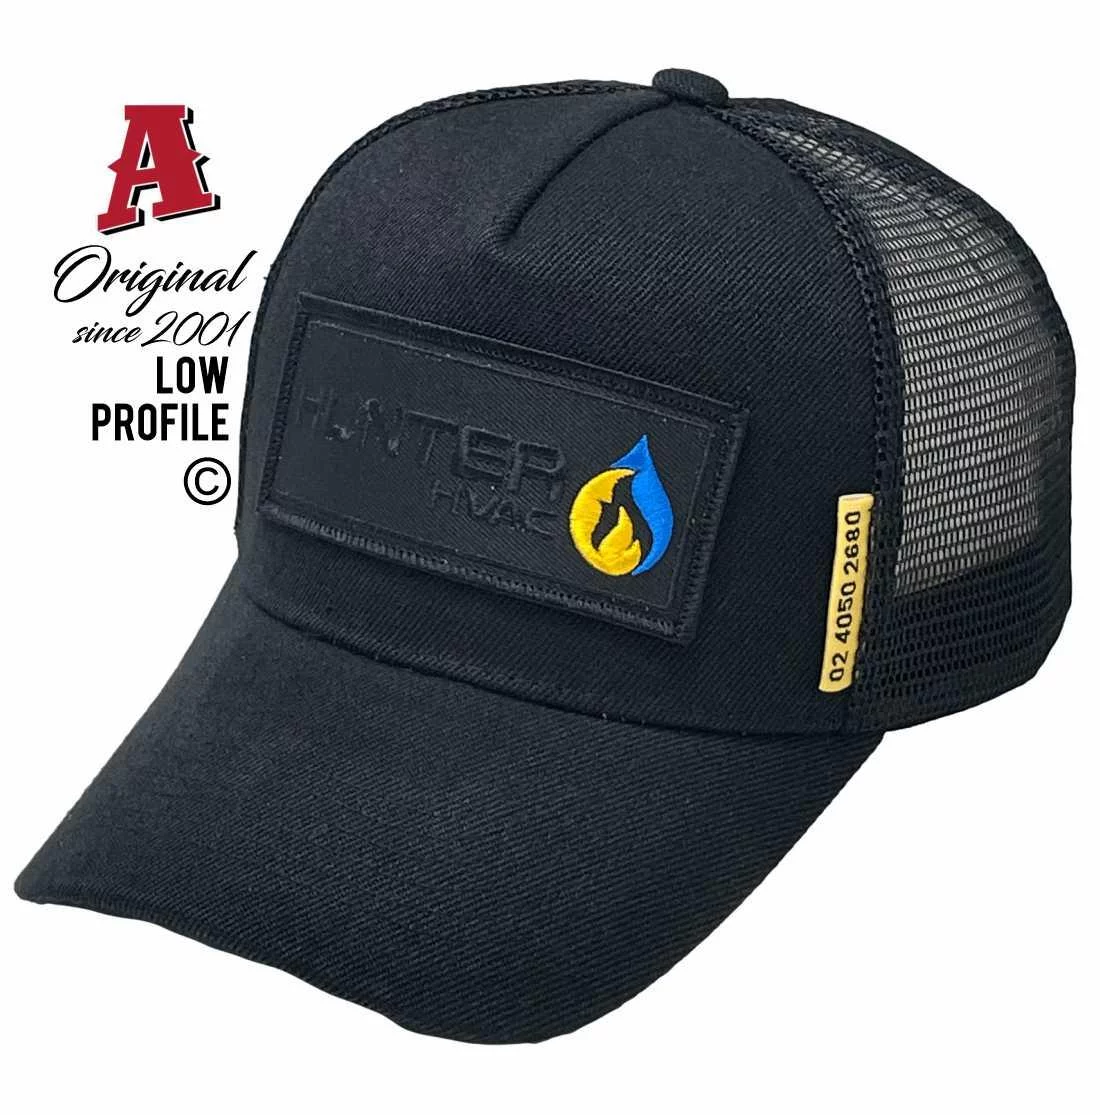 Hunter HVAC Wallsend NSW Basic Aussie Trucker Hats Low Profile with Embroidered Badge with Merrow Edge Black on Black Snapback